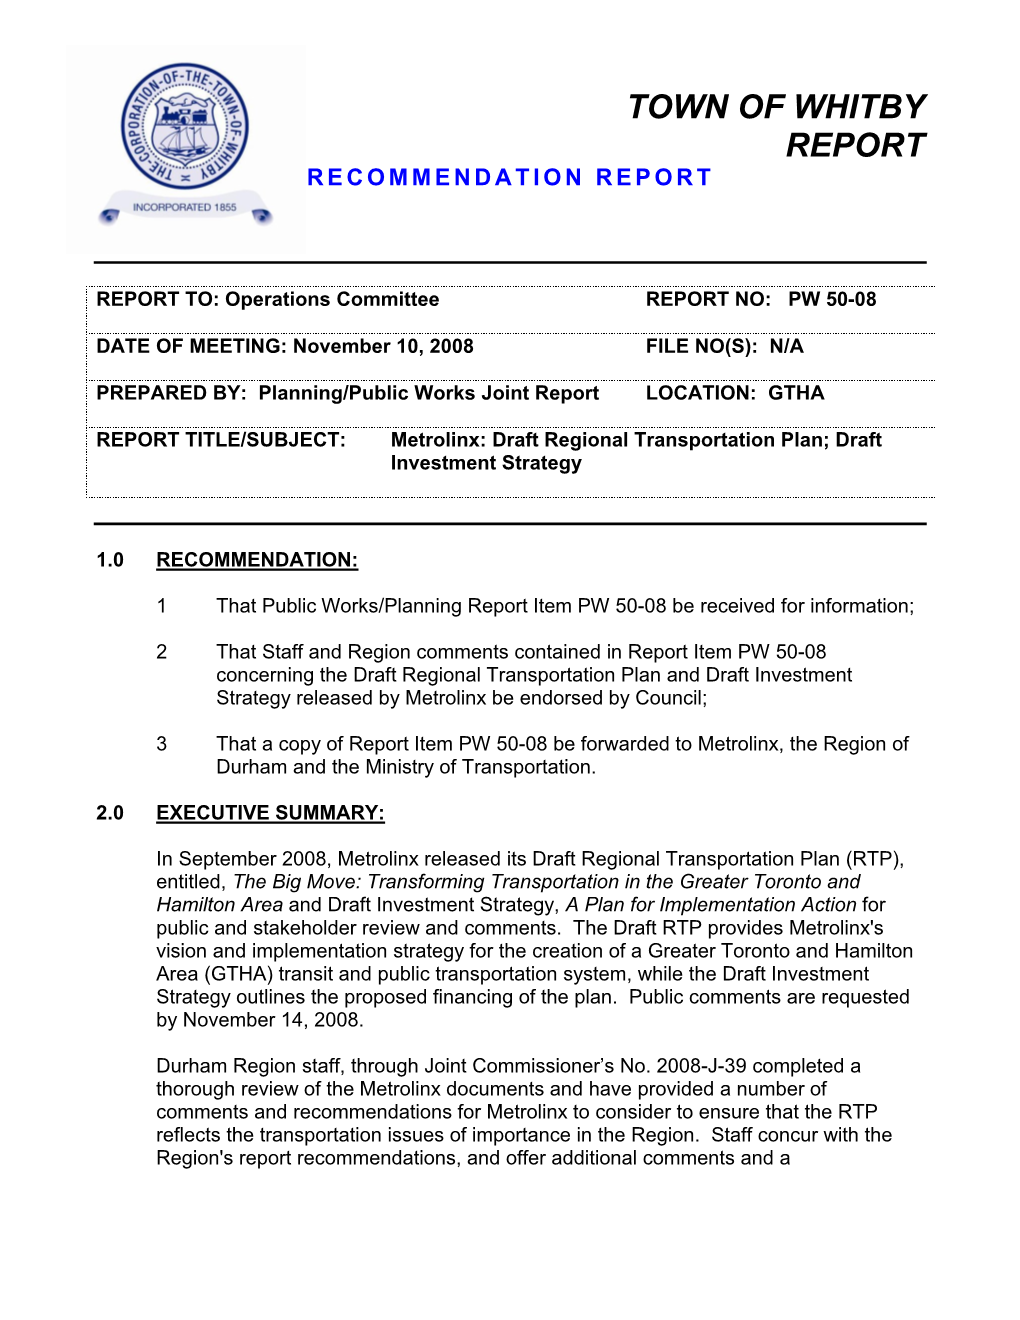 Town of Whitby Report Recommendation Report